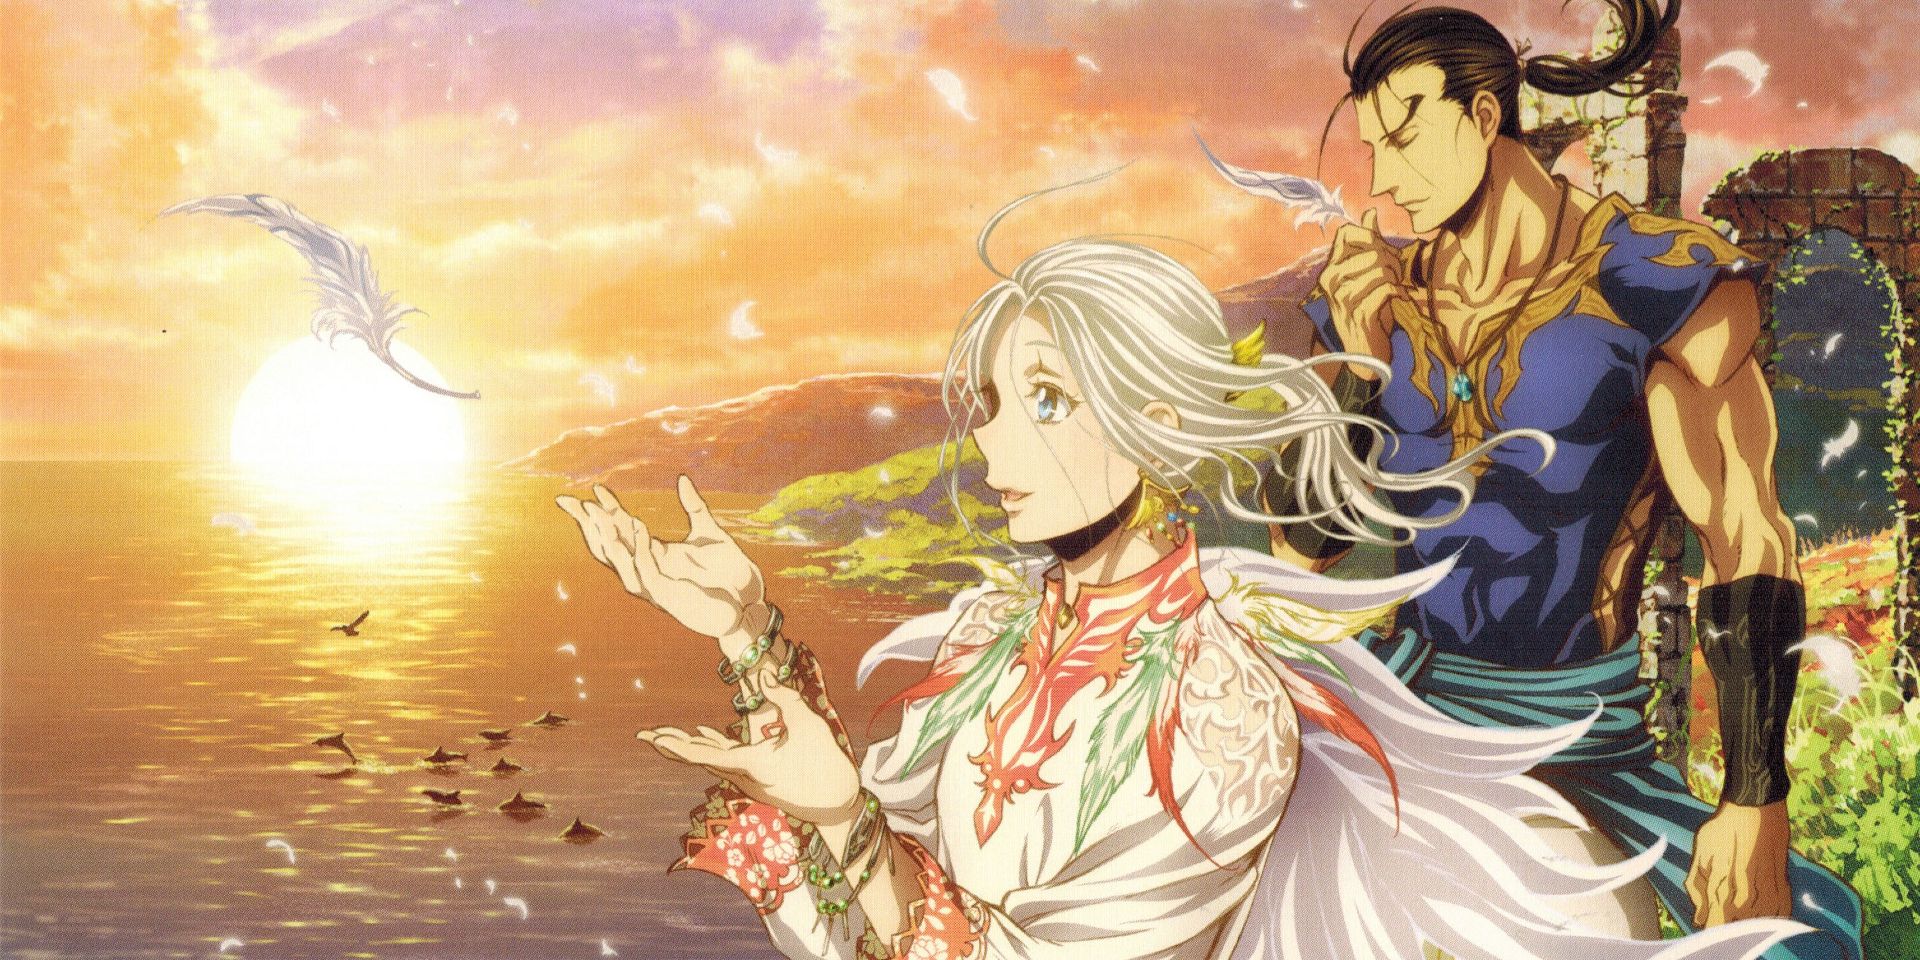 official artwork for the anime The Heroic Legend of Arslan featureing the prince and his loyal knight